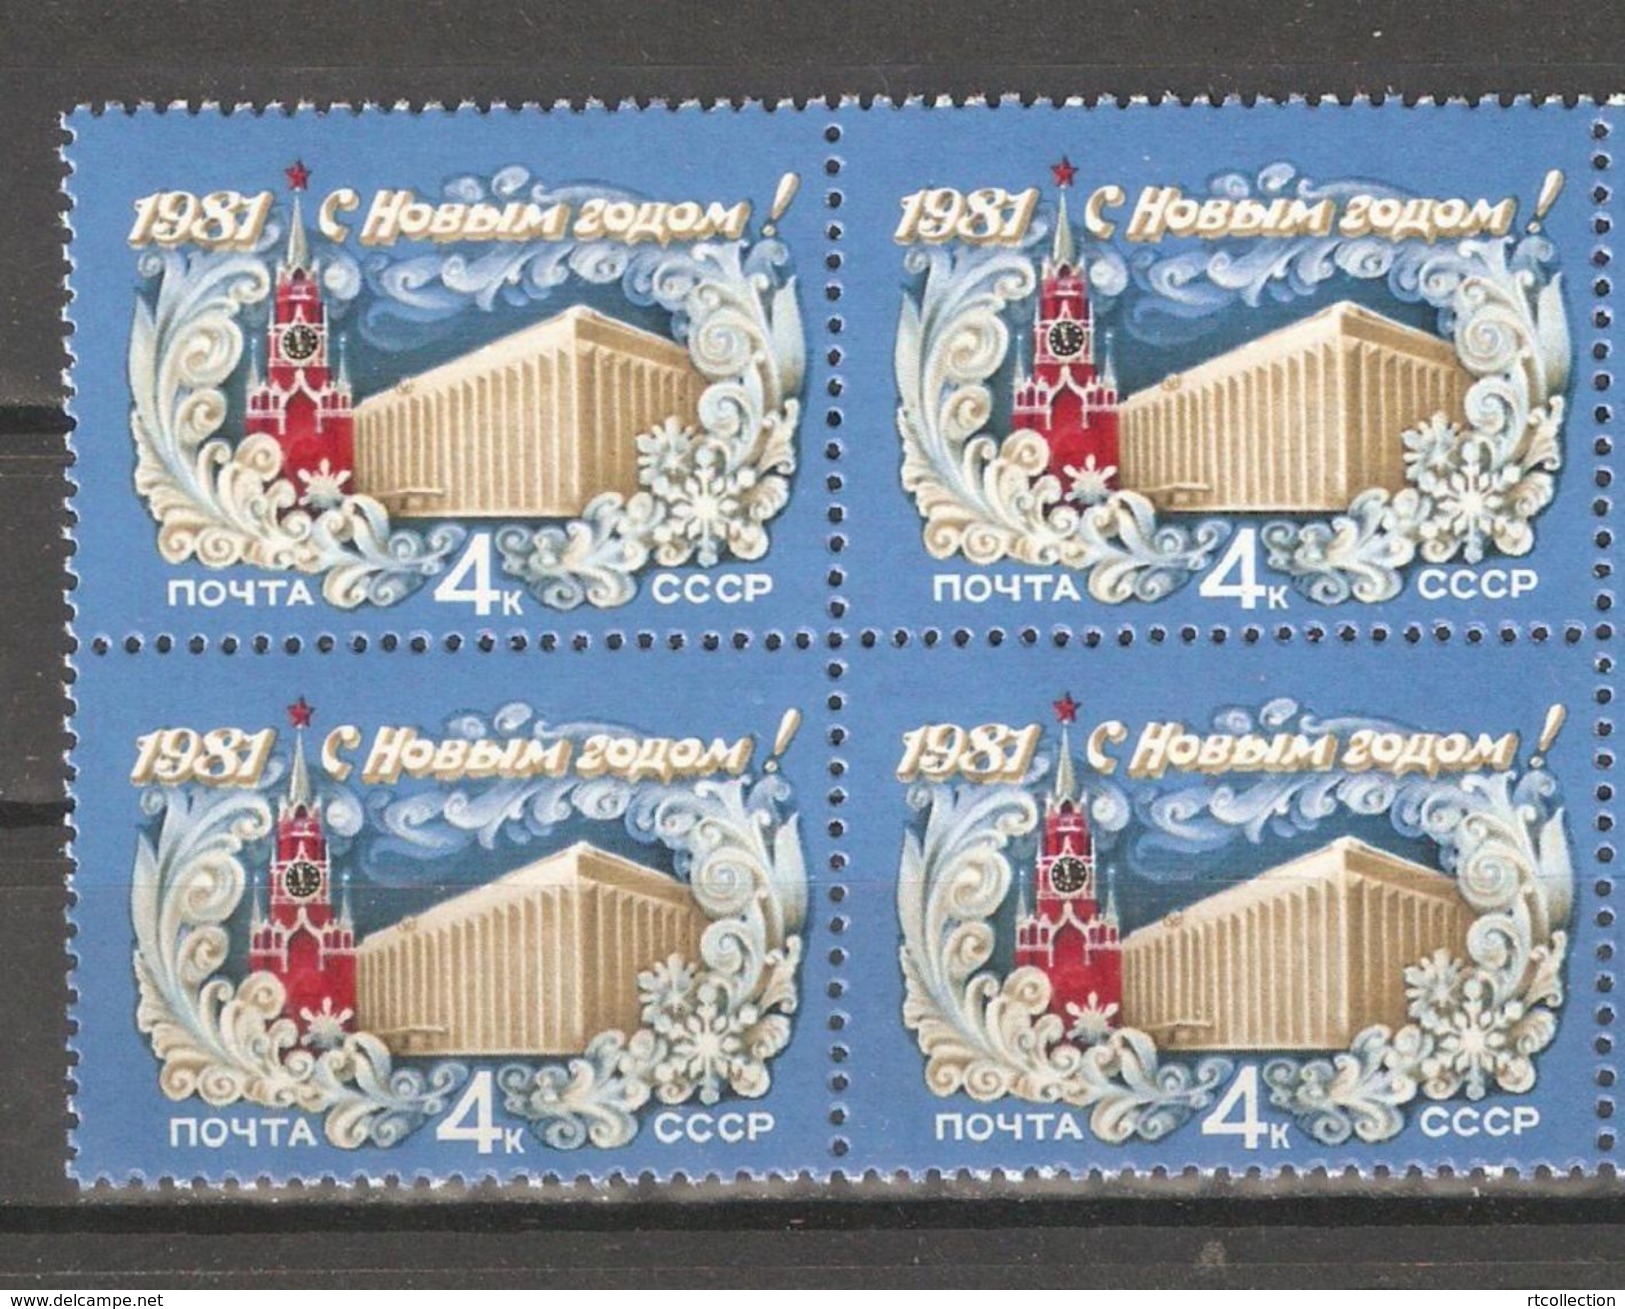 USSR Russia 1980 Block Happy New Year 1981 Seasonal Celebrations Holiday Clocks Architecture Stamps MNH Sc 4889 Mi 5019 - Relojería